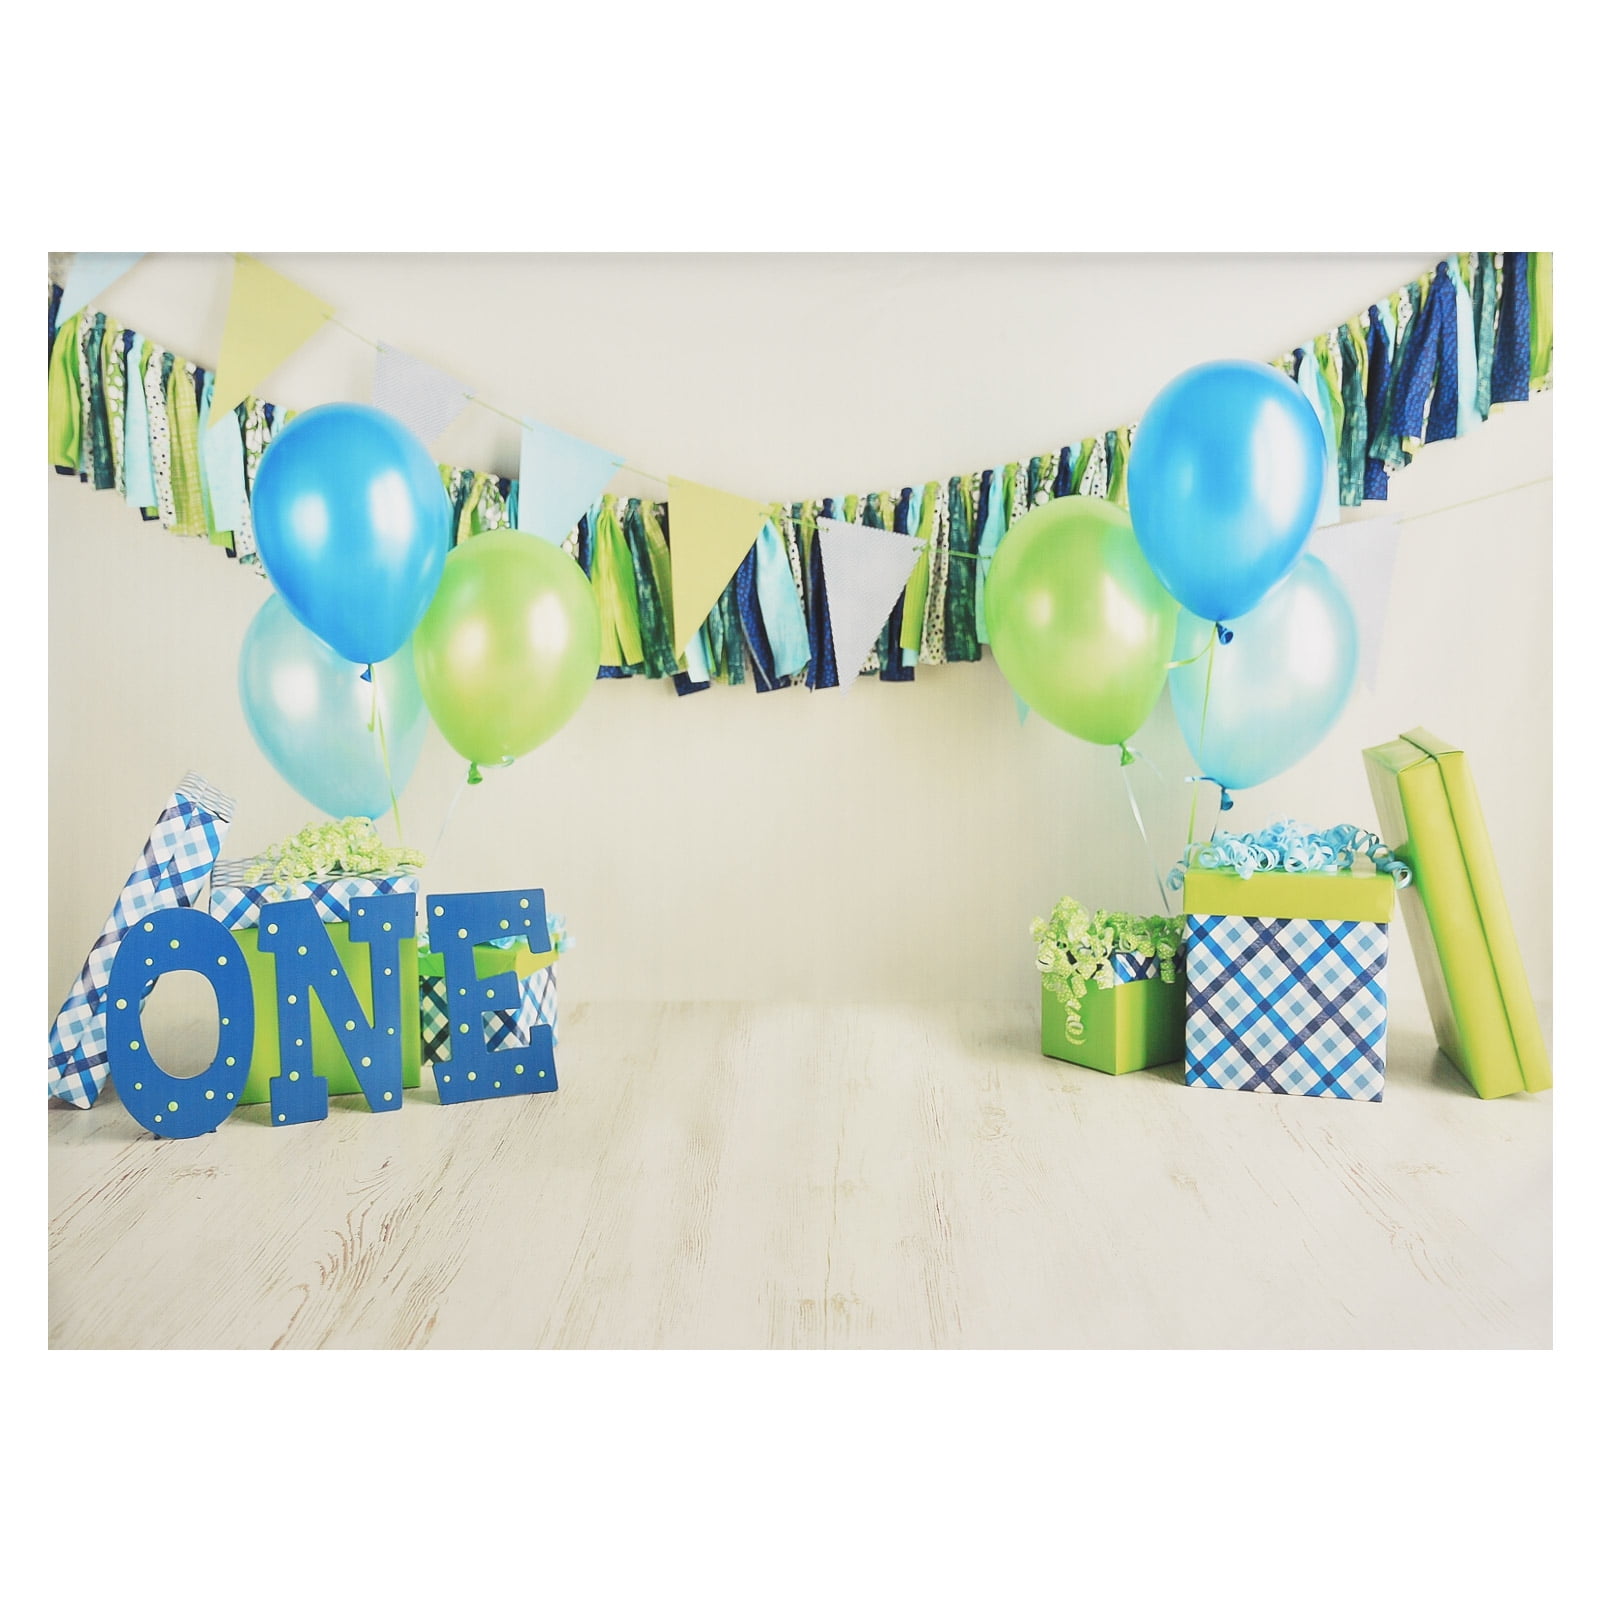 5x3ft Happy Birthday Backdrop Polyester Photography Background Cute Sleeping Baby Birds Gifts Balloon Birthday Party Background Photo Shooting Studio Props 